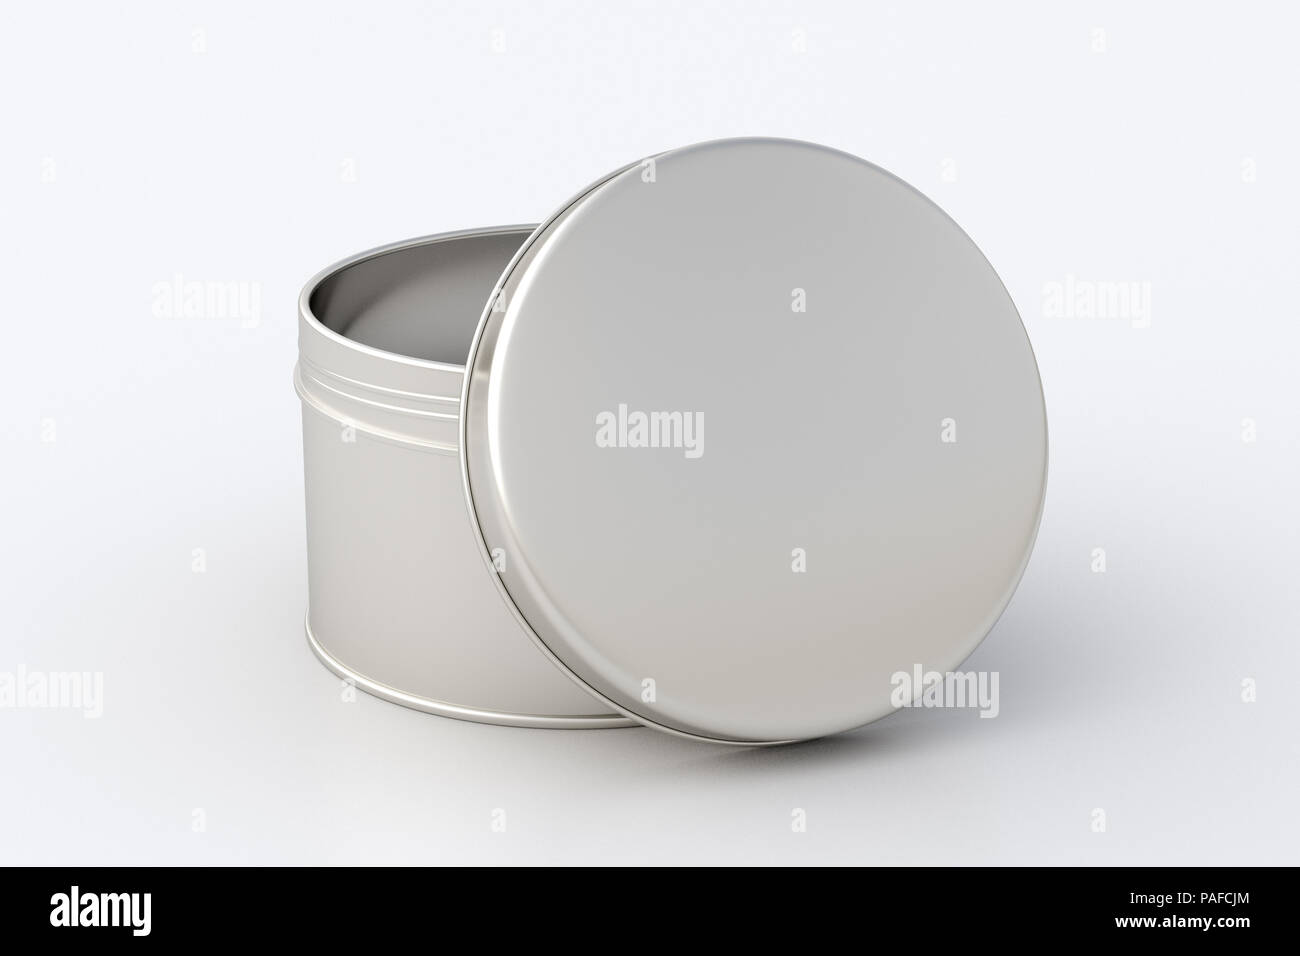 Download Blank Silver Metal Round Tin Container Box With Opened Lid On White Background Package Mockup With Clipping Path Around Container 3d Illustration Stock Photo Alamy